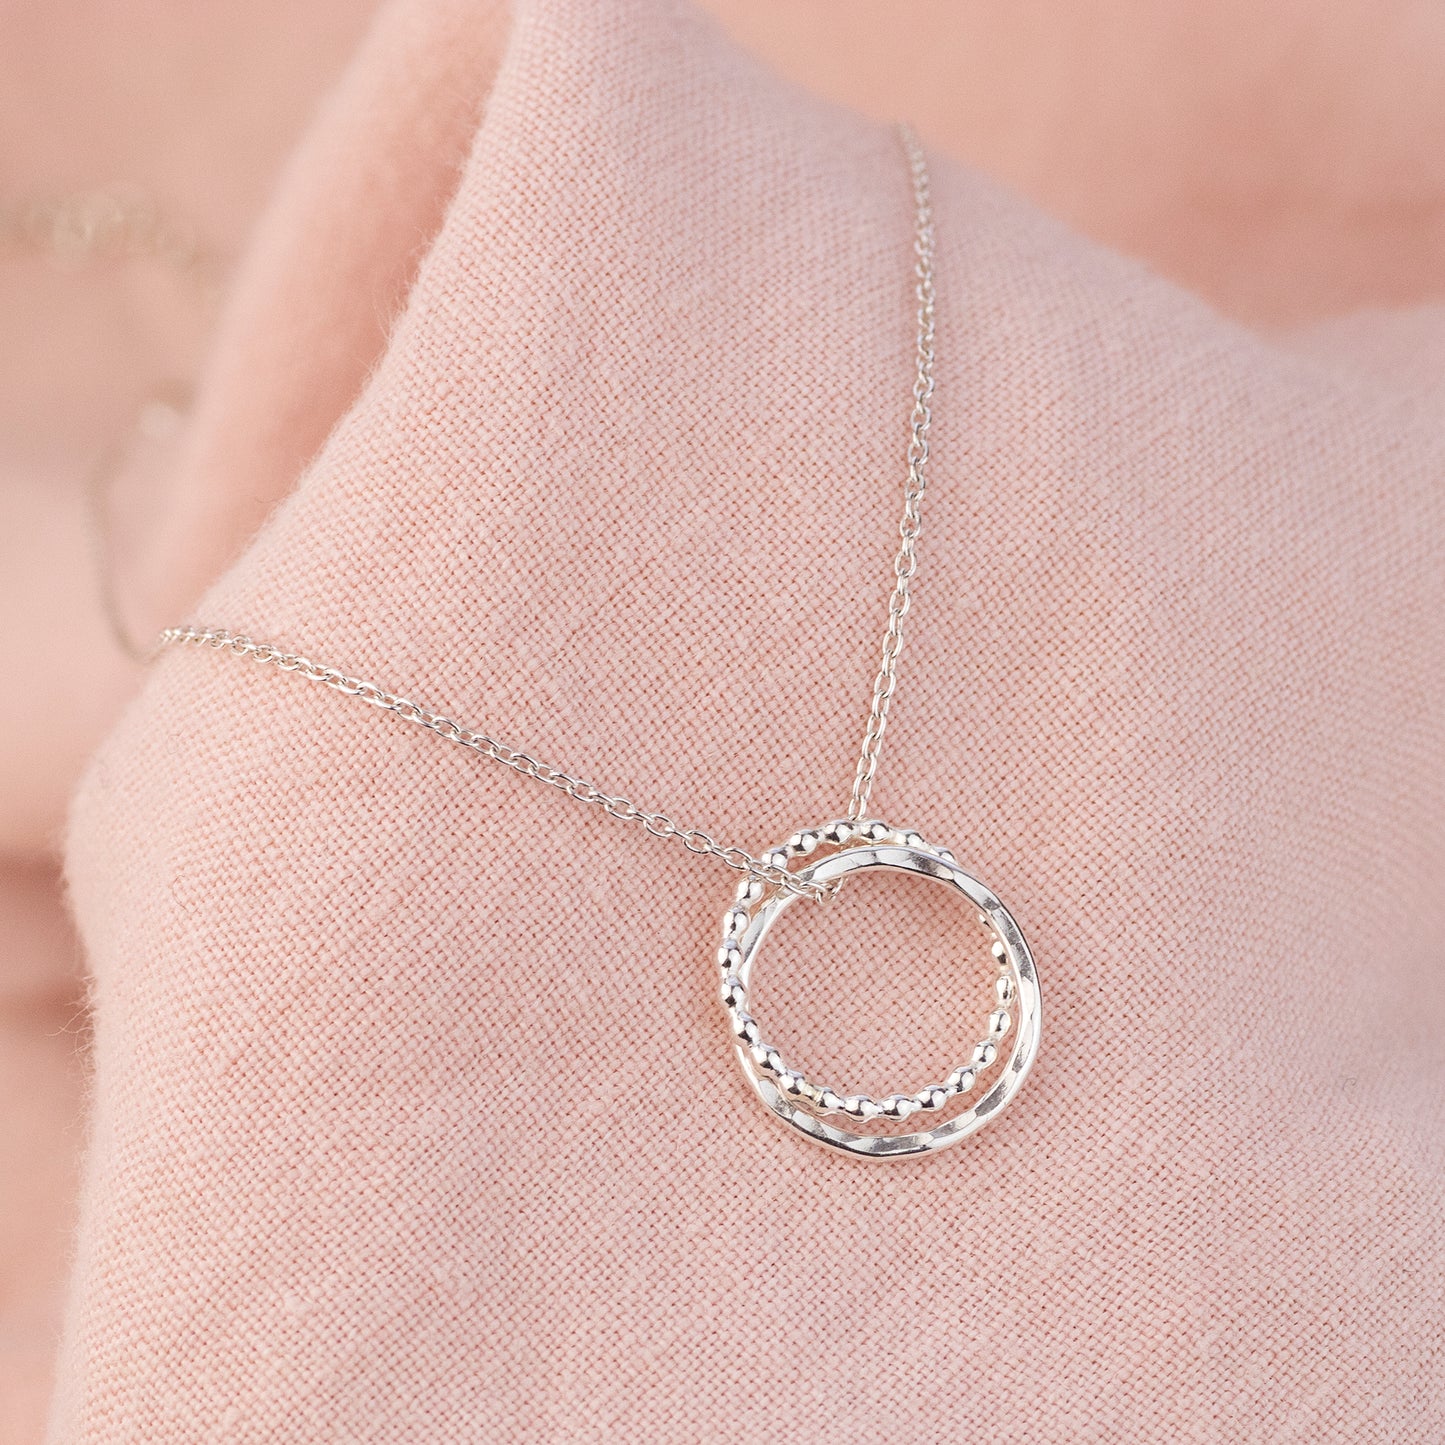 2nd Anniversary Necklace - Petite Silver - The Original 2 Rings for 2 Years Necklace